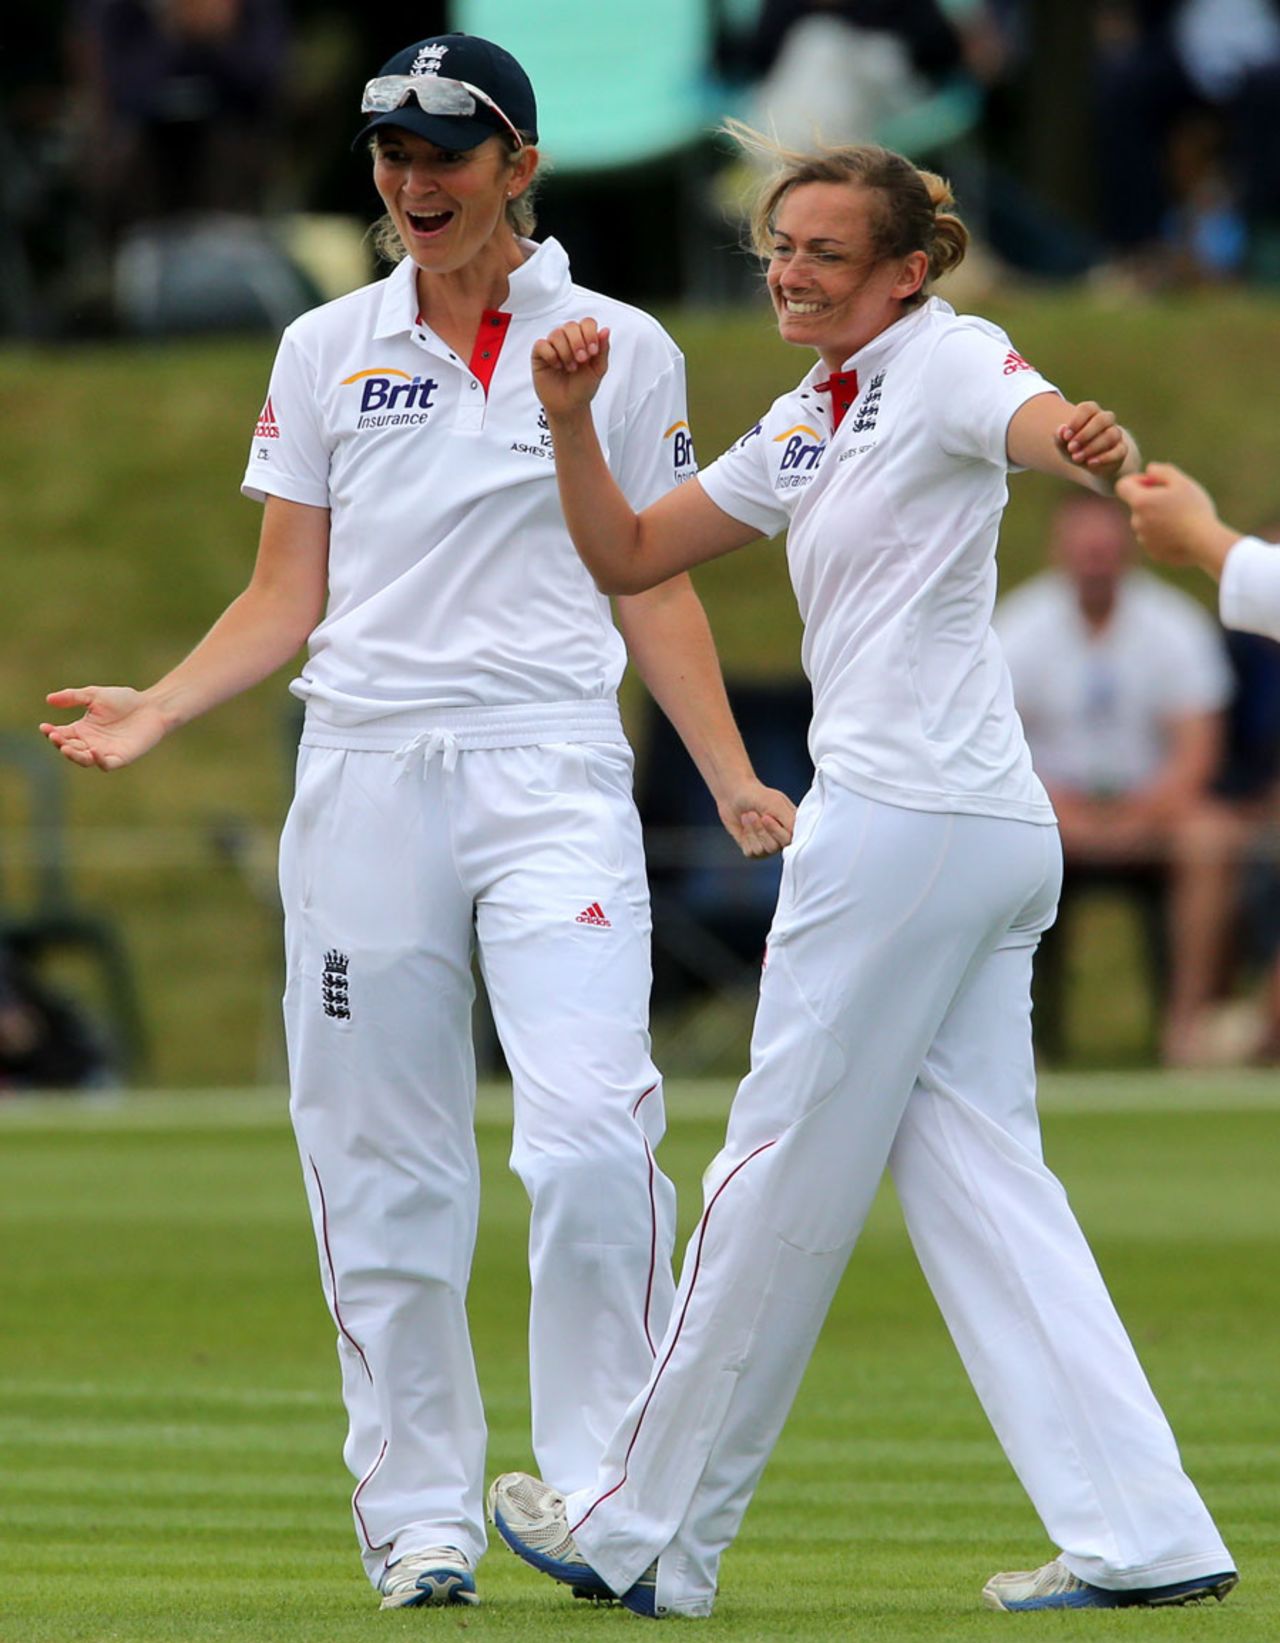 Charlotte Edwards and Laura Marsh celebrate a wicket, England Women v Australia Women, Only Test, 2nd day, Wormsley, August 12, 2013